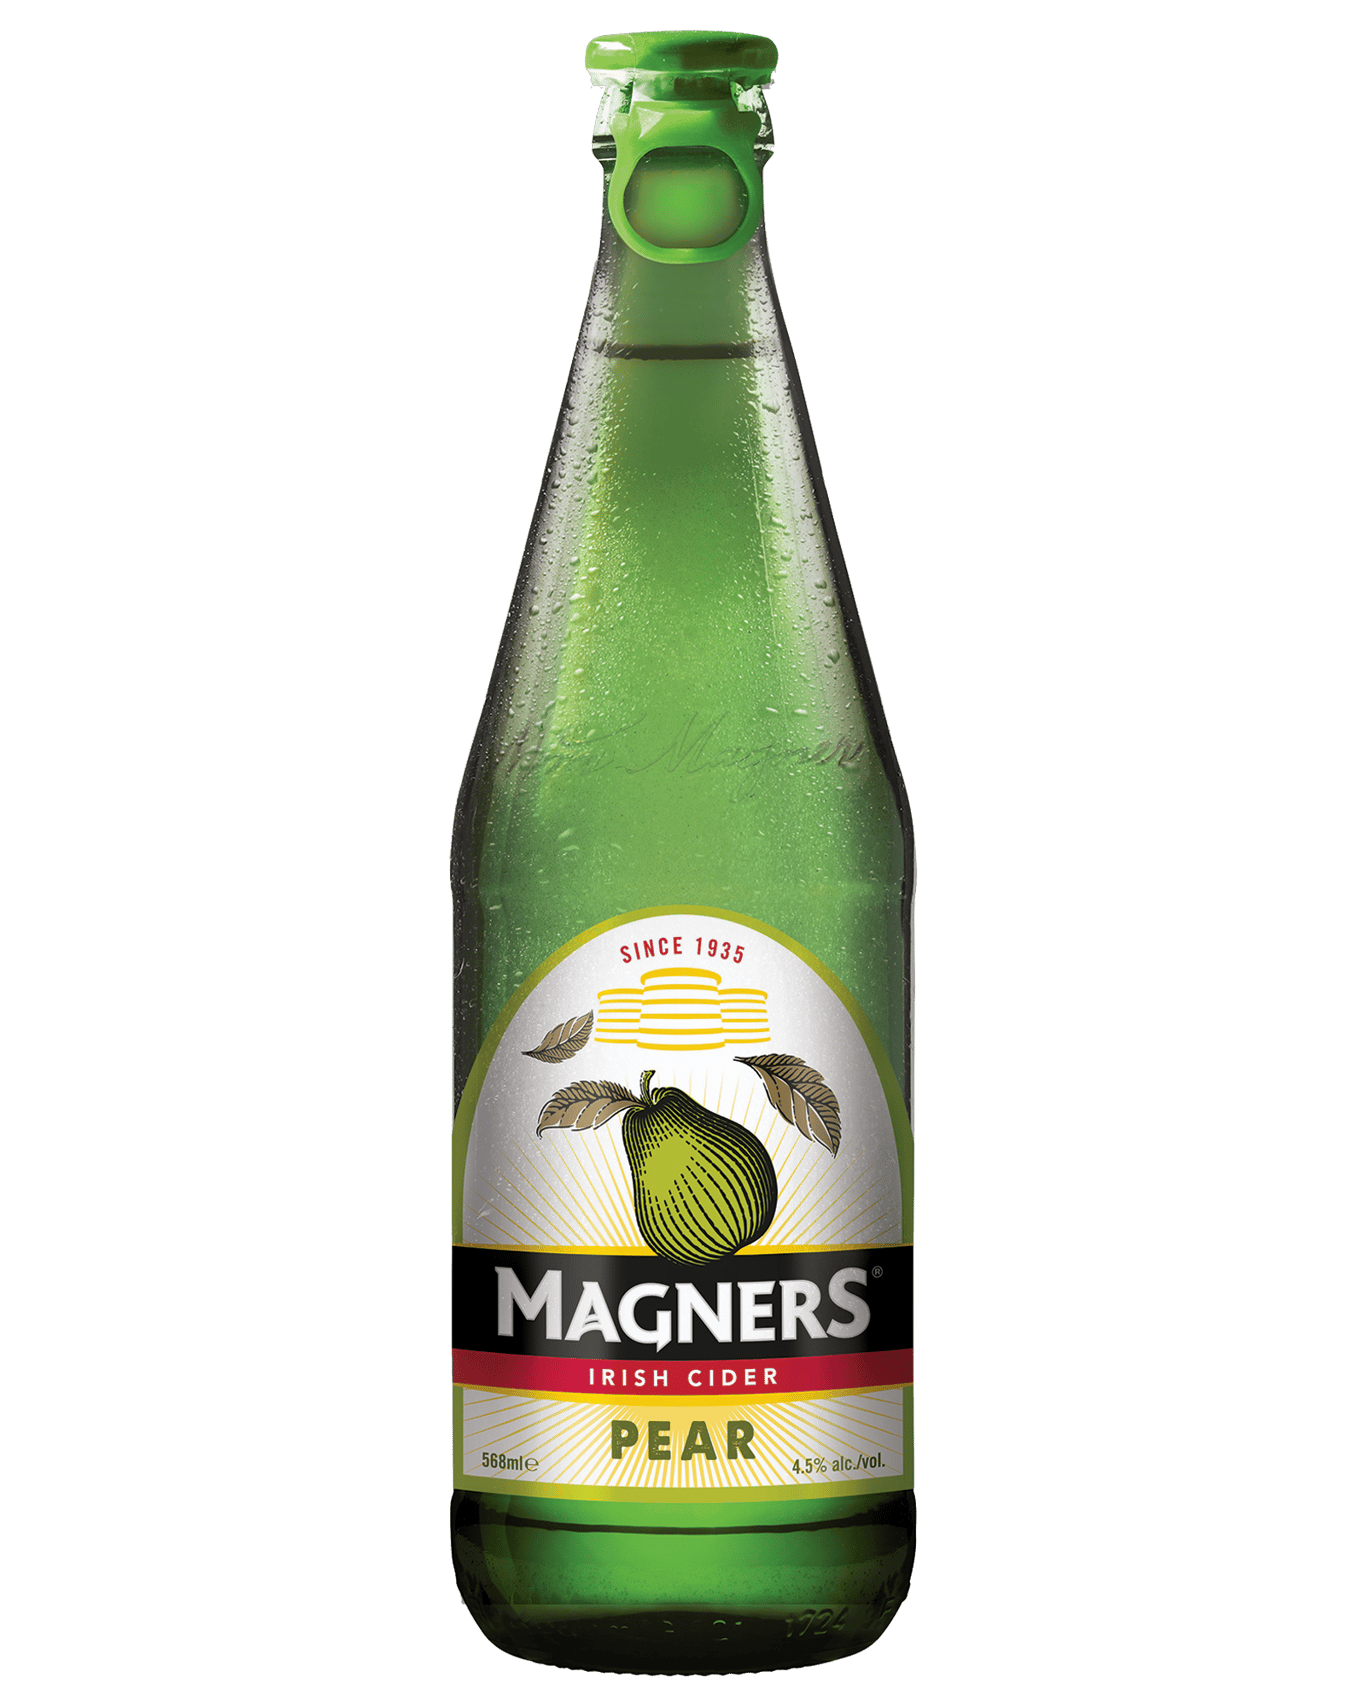 Buy Magners Pear Cider 568ml Online Lowest Prices In Australia Dan